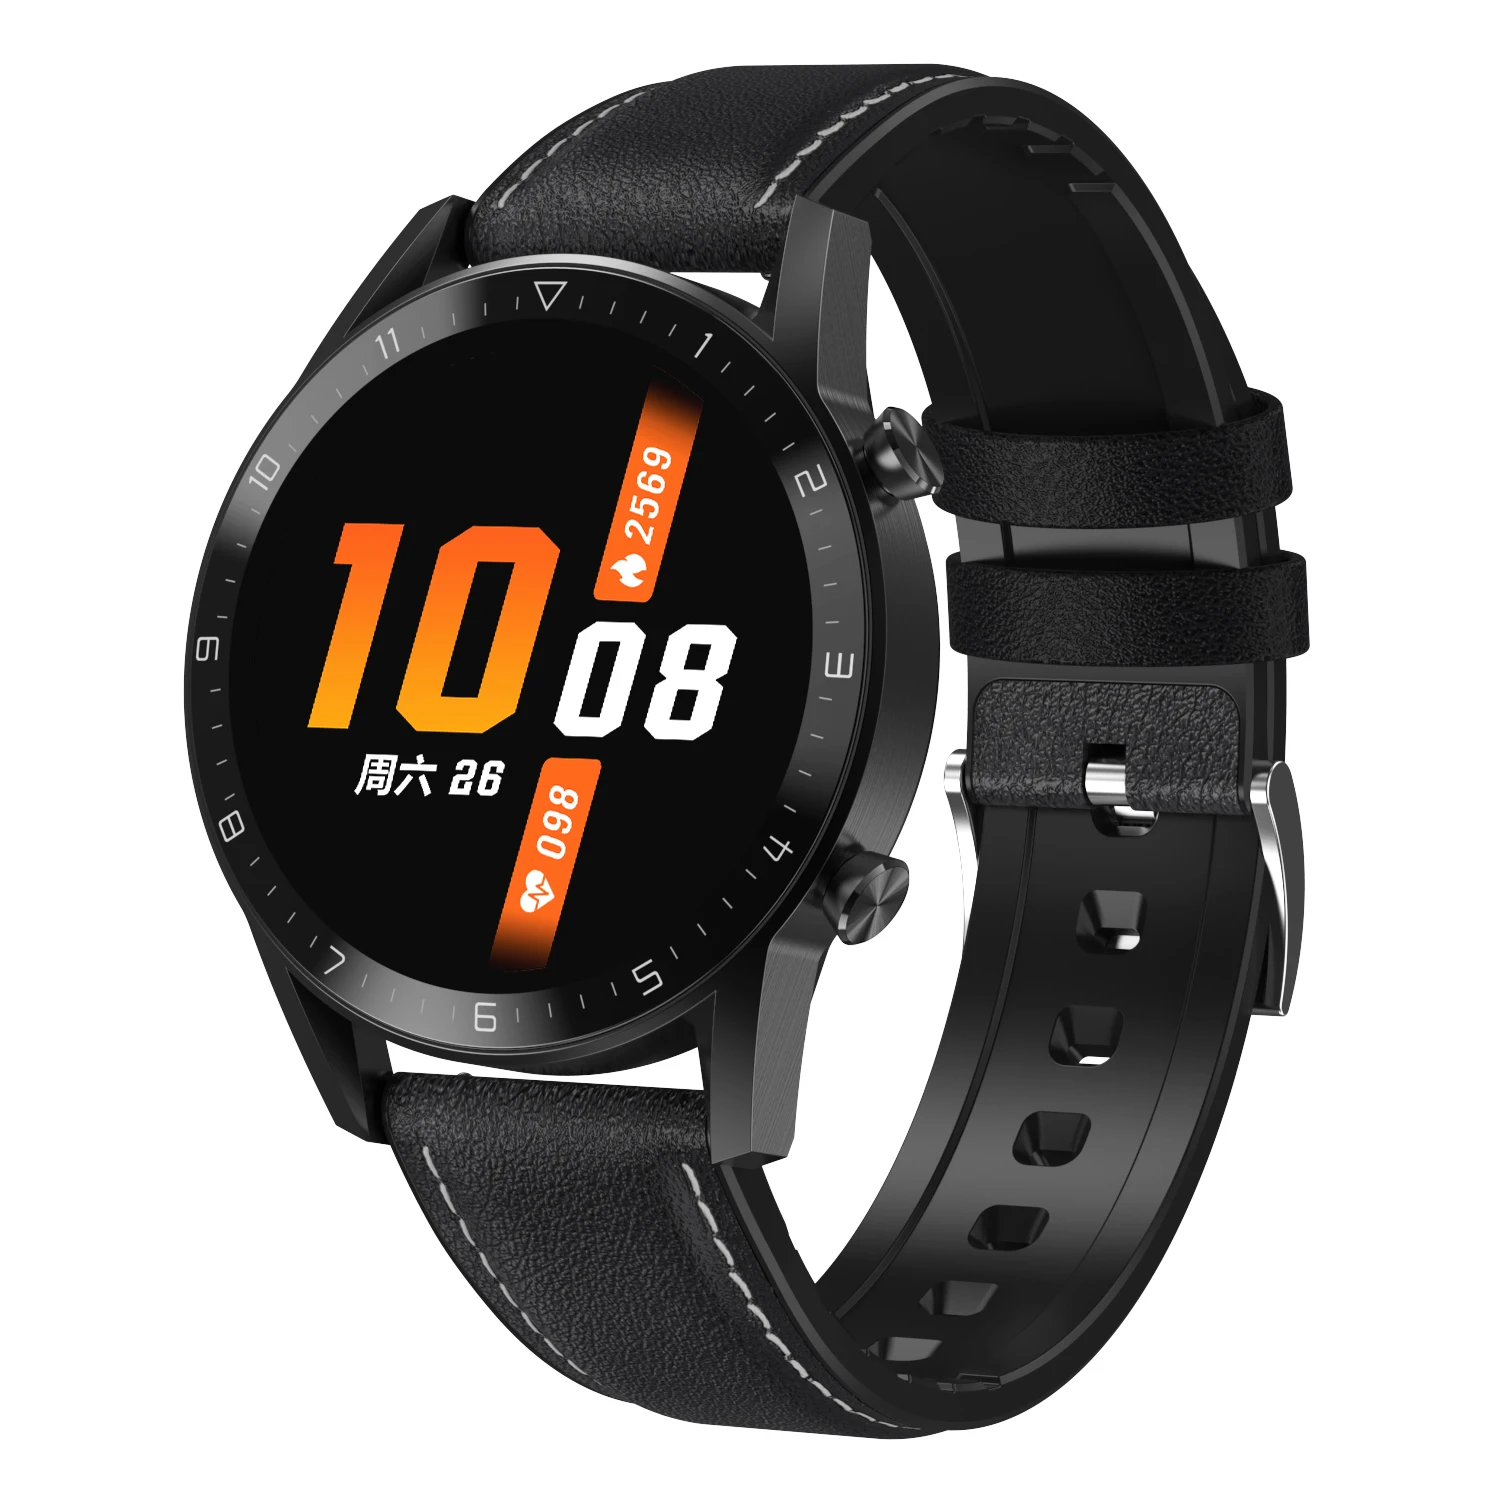 

Smart Watch China Factory Wholesale Price DT92 SMS Reminder Weather IP68 Heart Rate Blood Pressure Android iOS Smartwatch